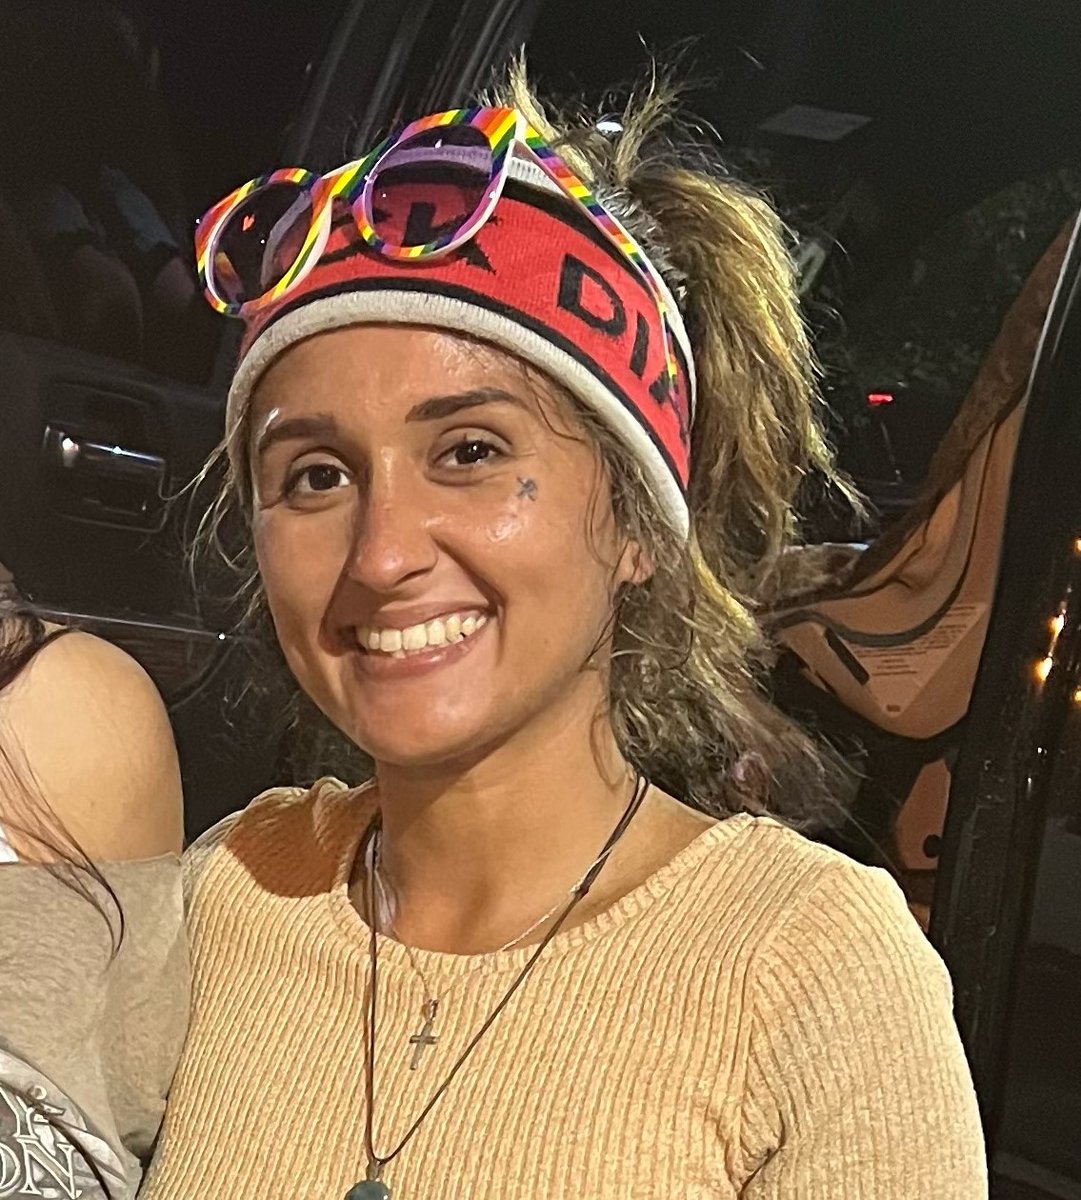 #MISSING: 22-year-old Brooke Lewis (5'4', 135 lbs.). Last seen 4 p.m. January 23 in the East #Towson area. Unknown clothing description. Brooke has several tattoos, including a small one under her left eye. Anyone with info is requested to call 911 or 410-307-2020. #HelpLocate